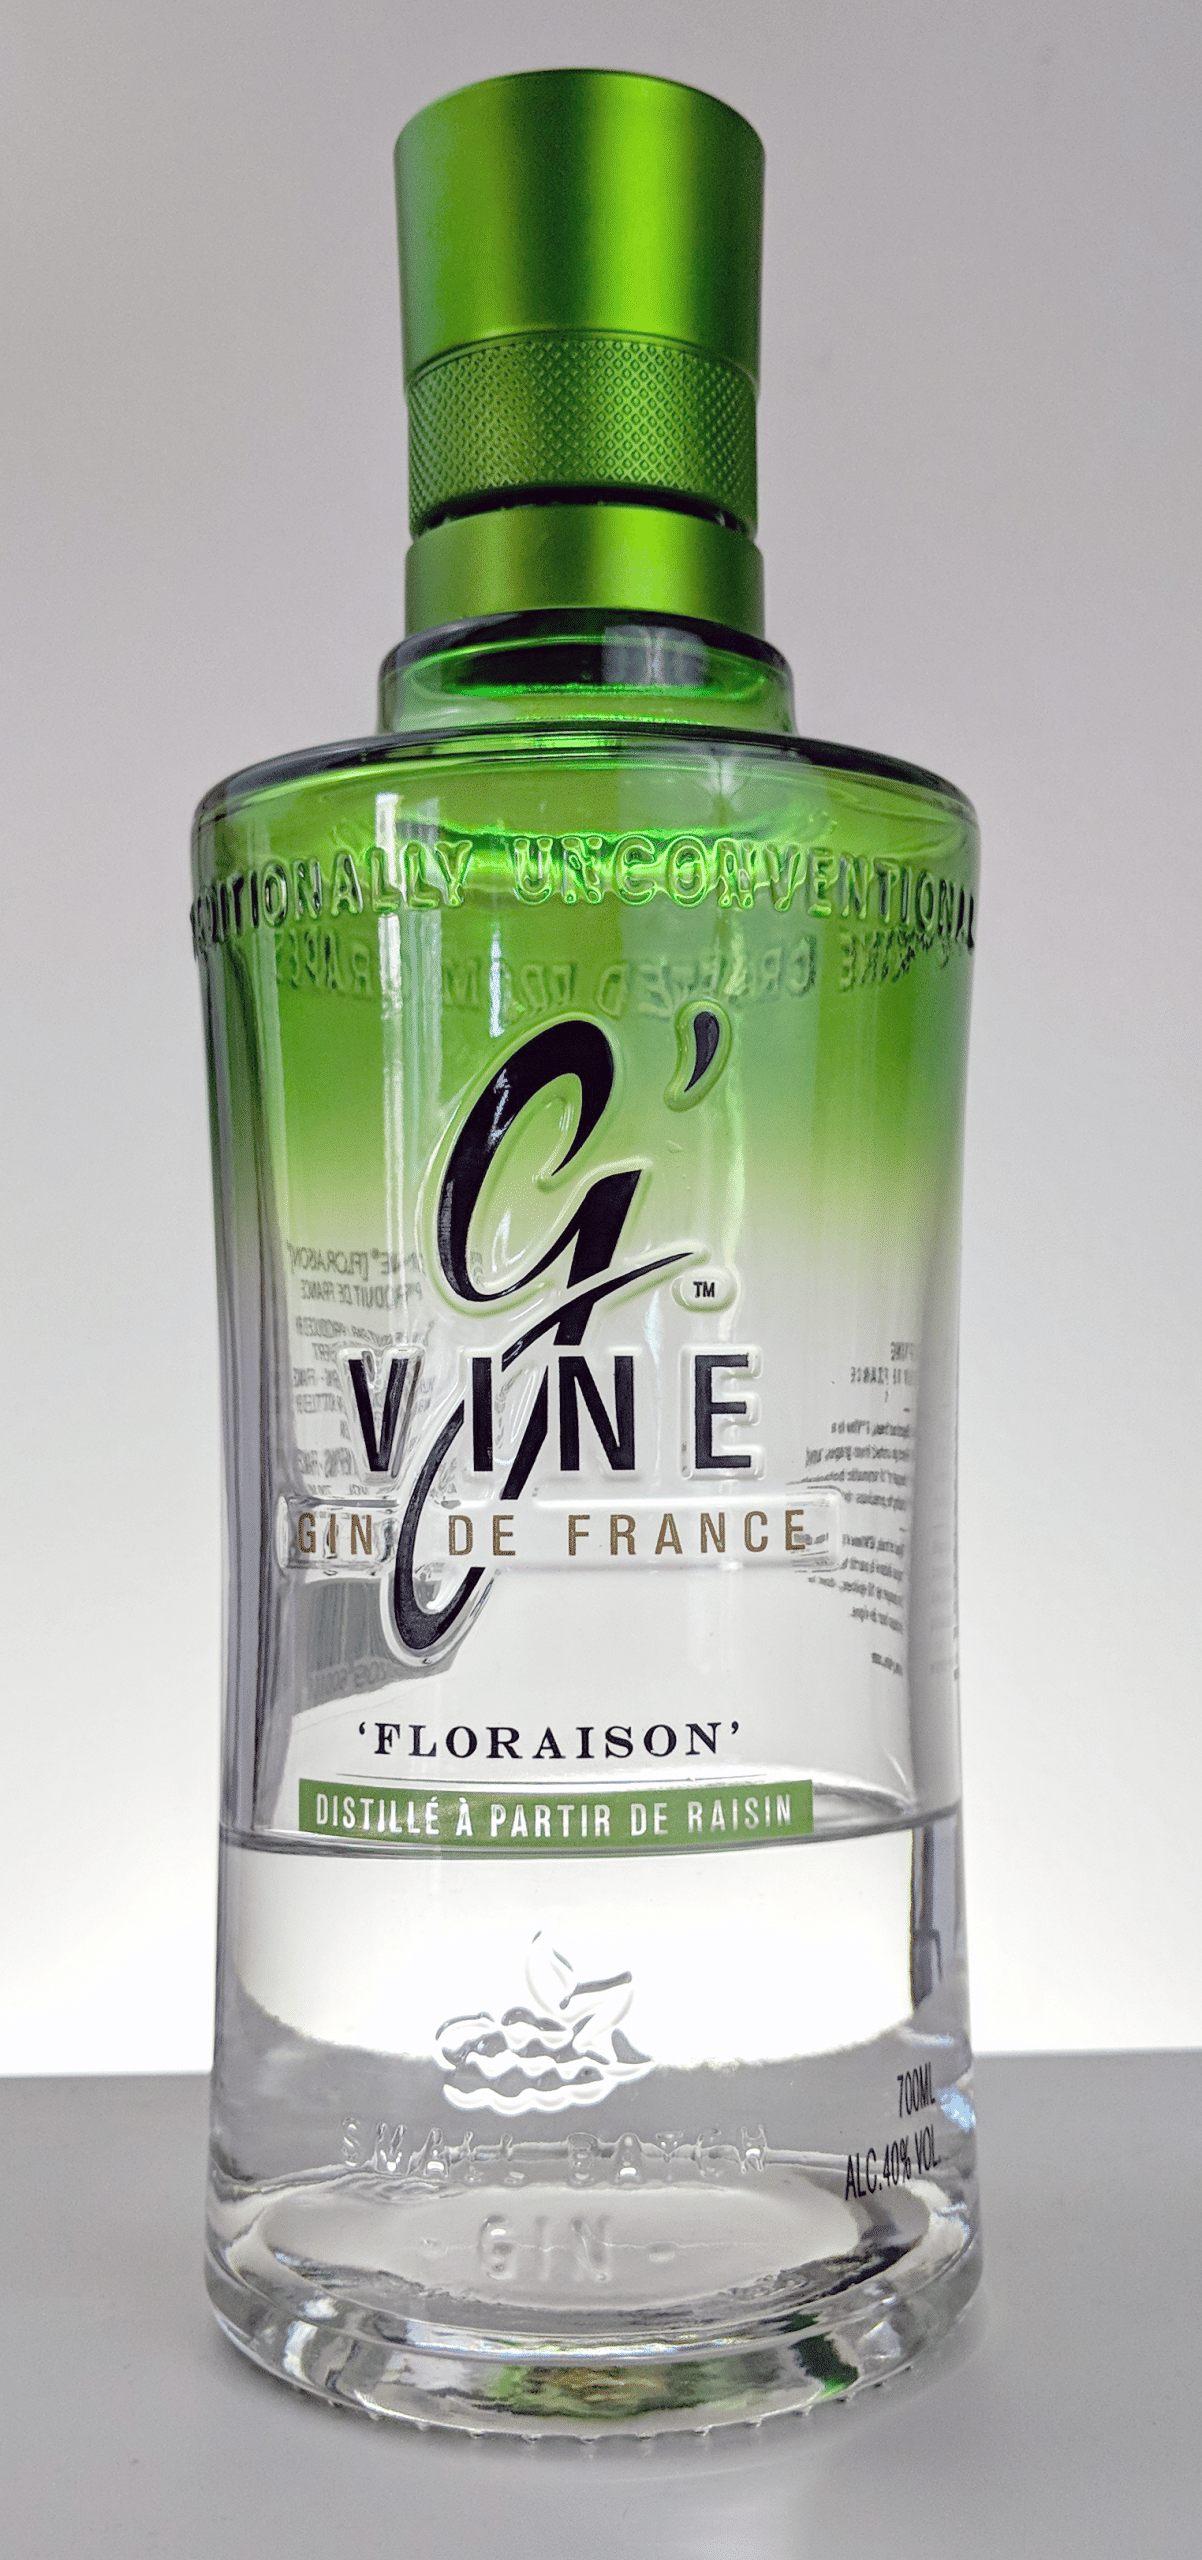 G\'vine Floraison | Expert Tasting Notes and Review Gin